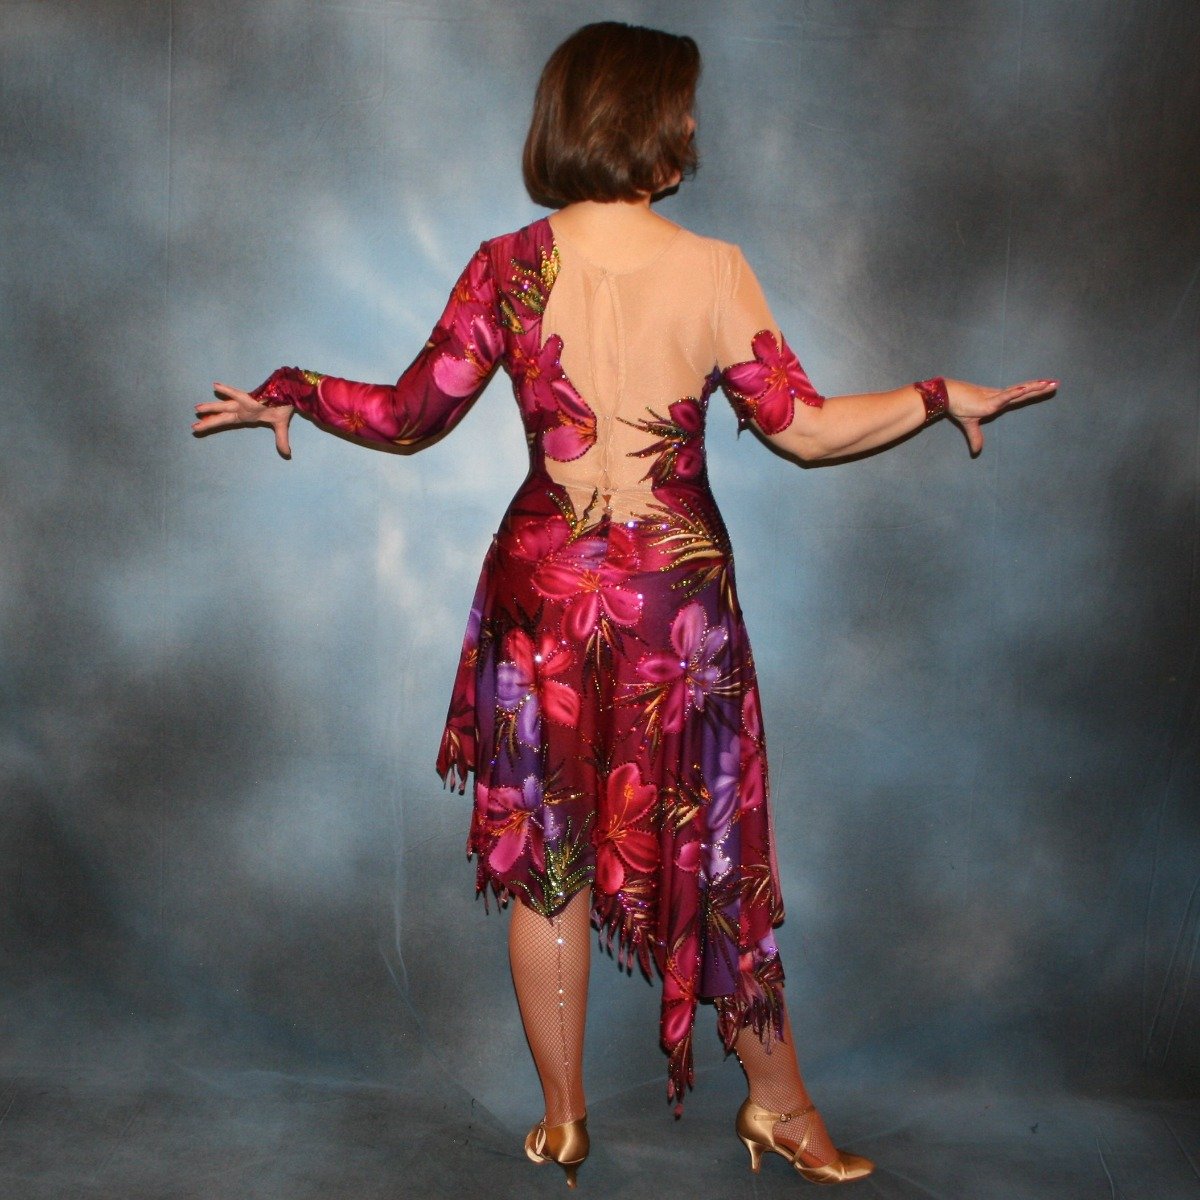 Crystal's Creations back view of Tropical print Latin/rhythm dress created in tropical print lycra in burgundies & purples on a nude illusion base, embellished lavishly with Swarovski rhinestone work in burgundies, purples, orchids & a touch of the greens & golds that are within the print.